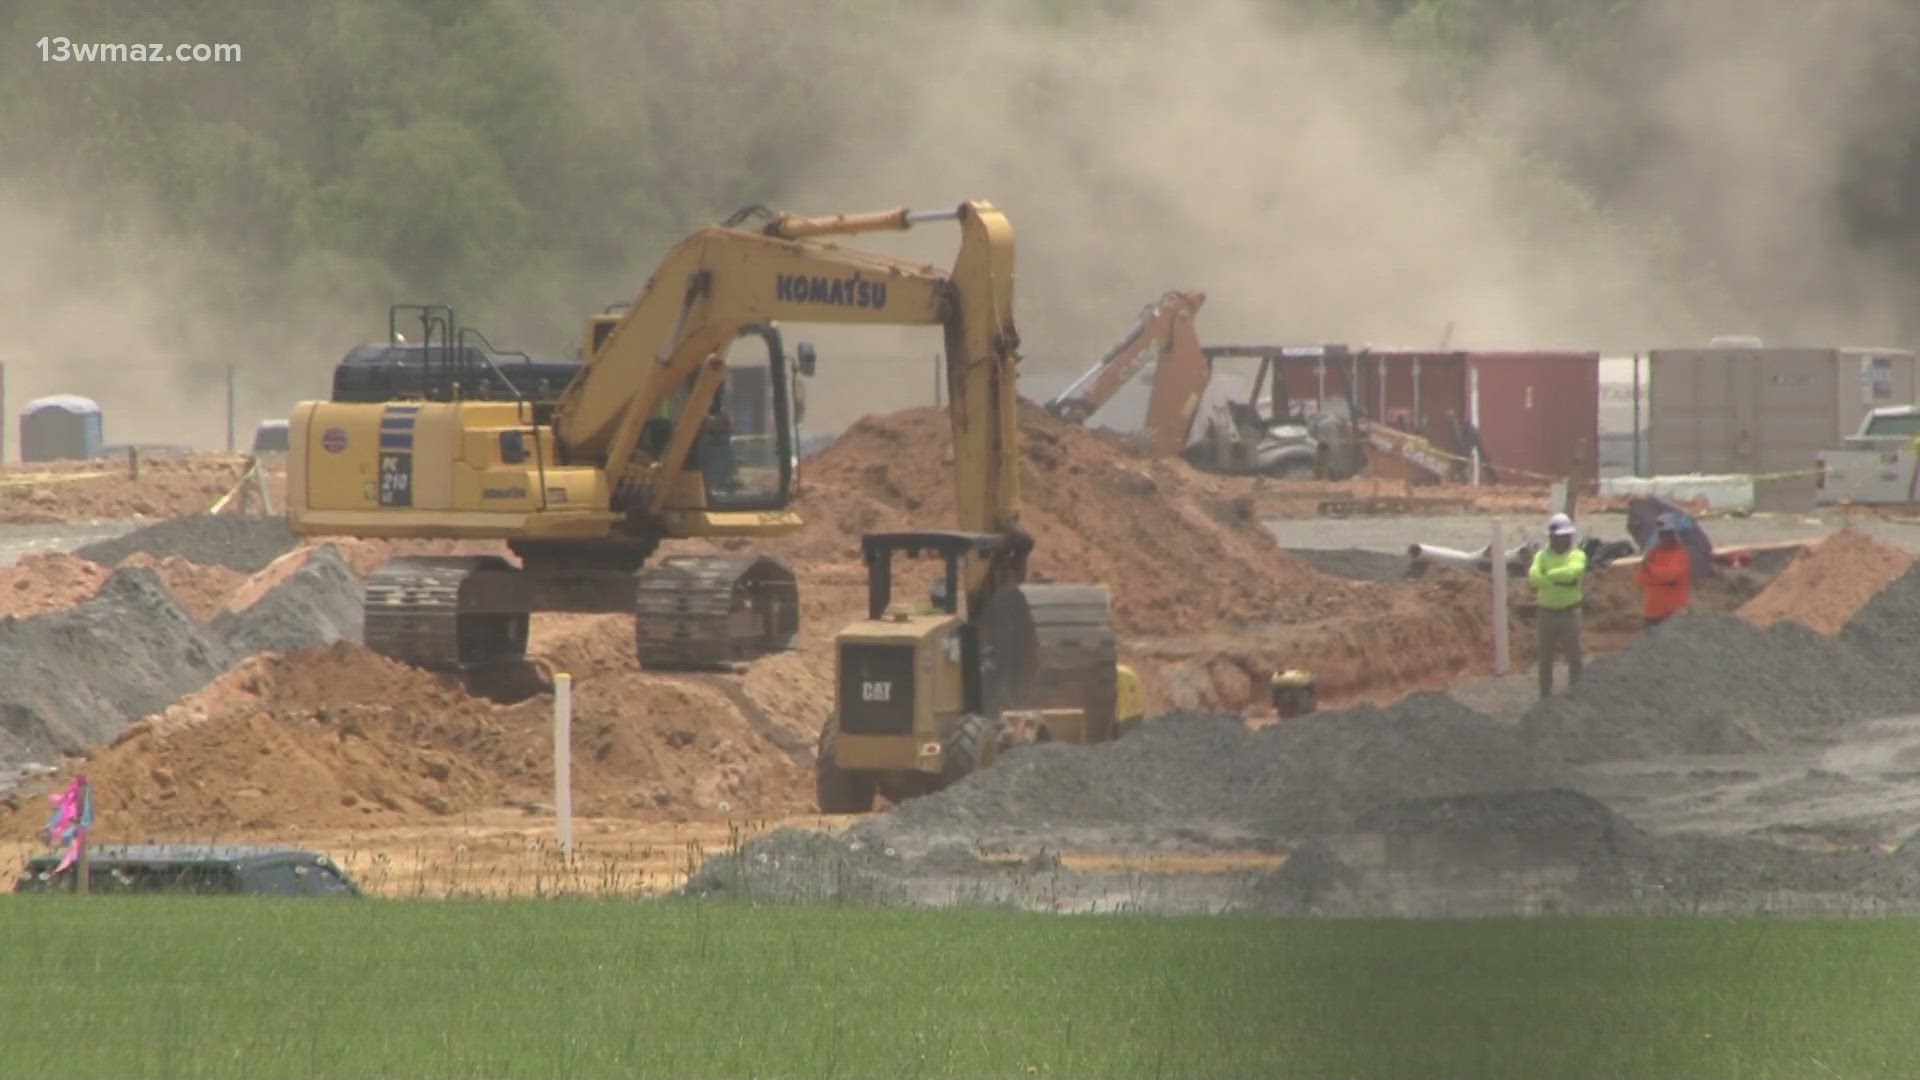 Gov. Brian Kemp's office announced the expansion Thursday. Hours later, construction crews were already working to clear land.